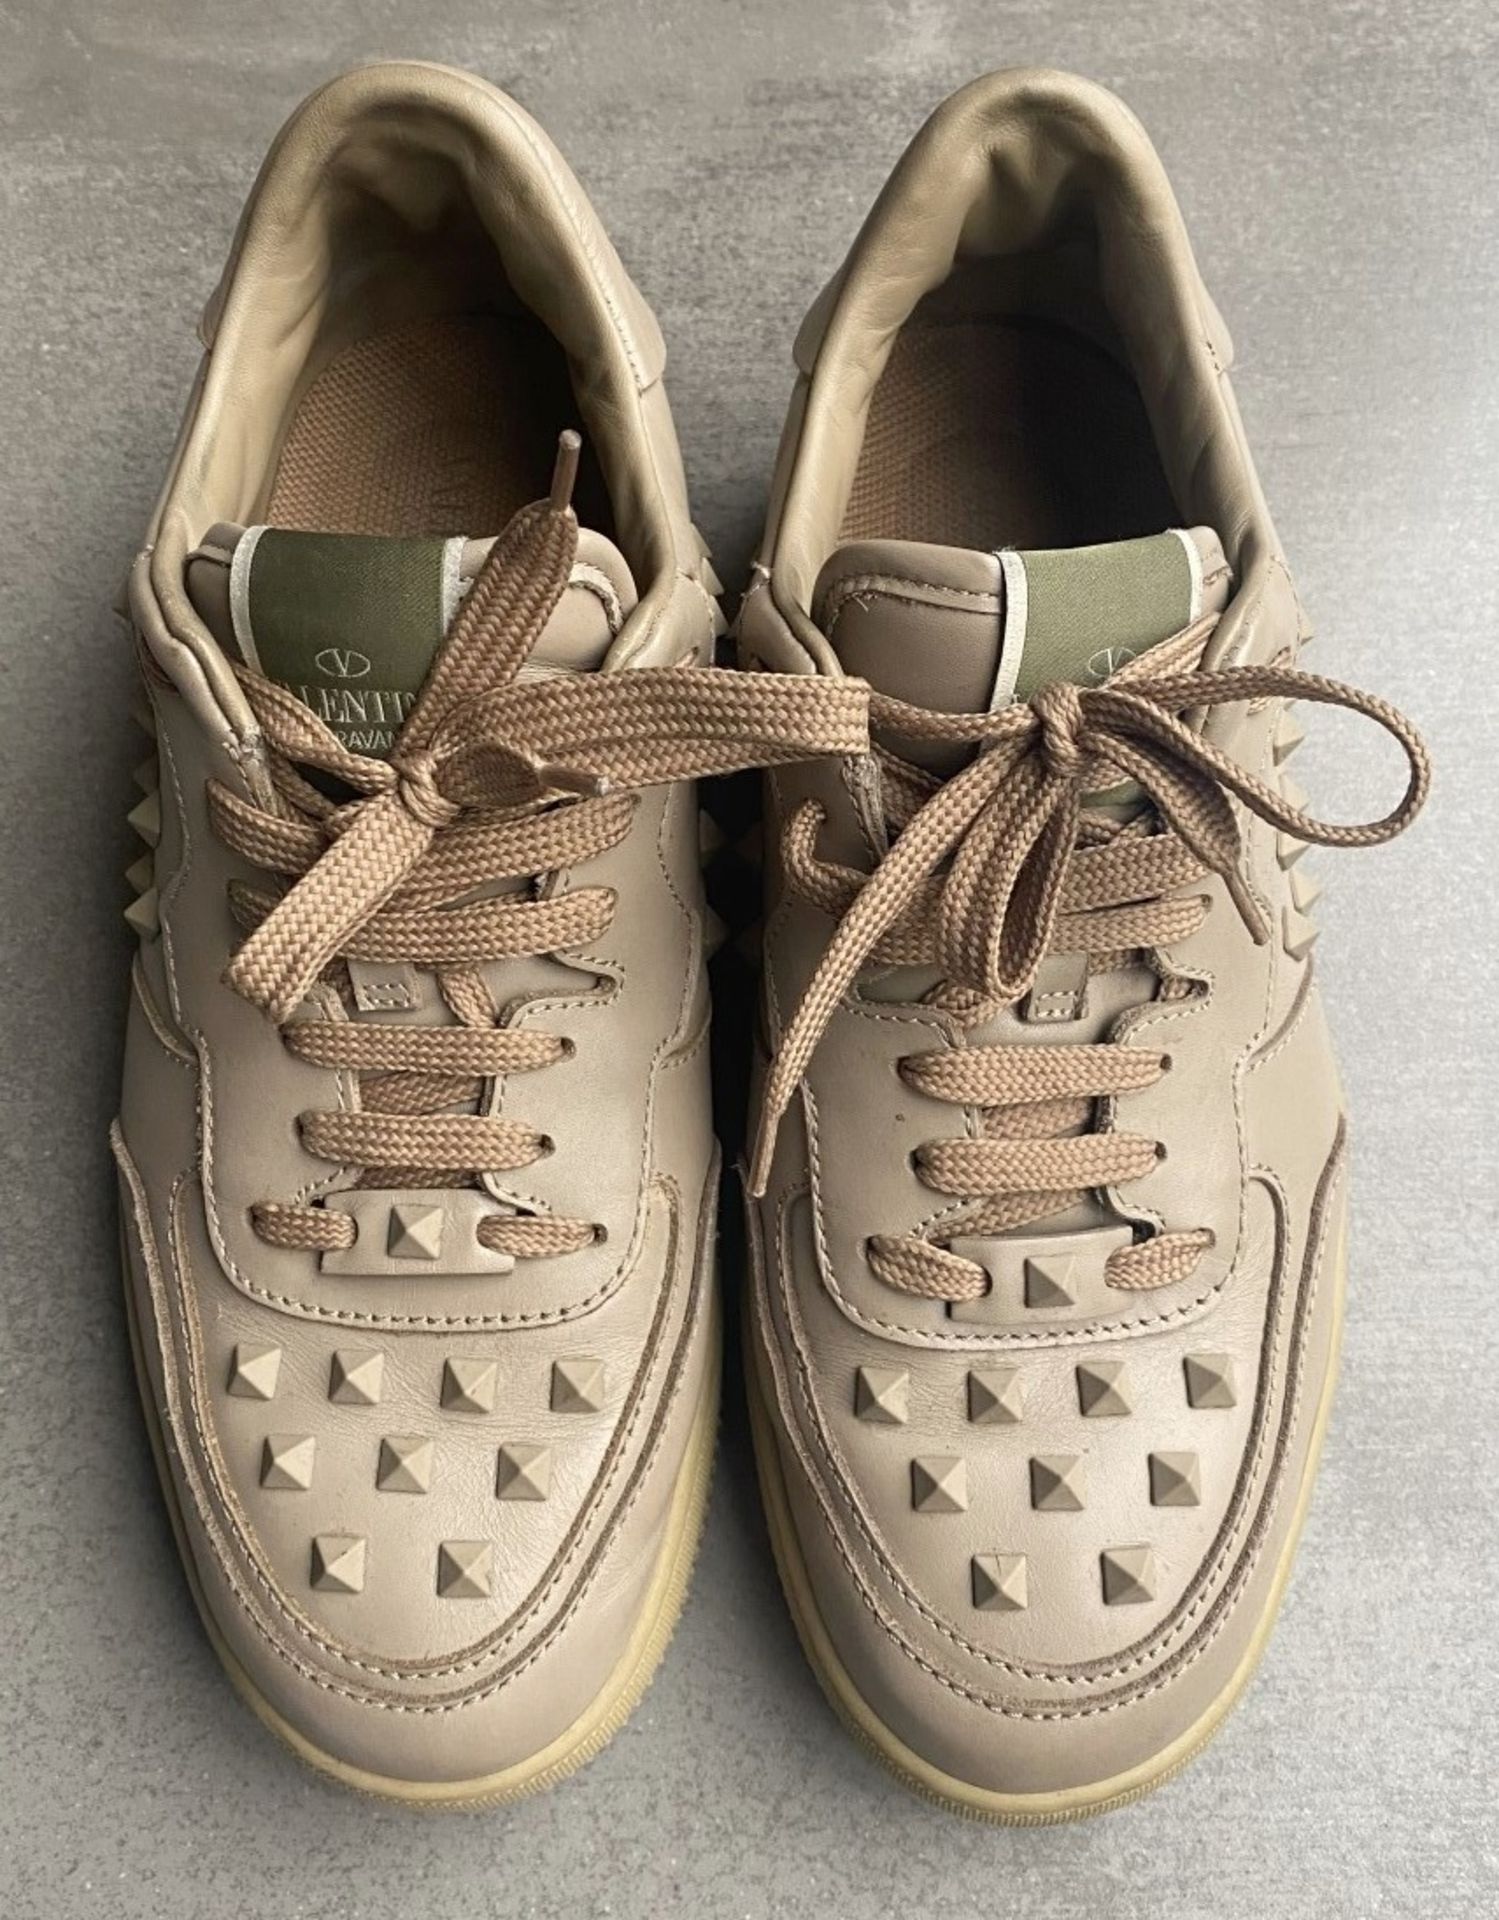 1 x Pair Of Men's Genuine Valentino Trainers In Beige - Size: 42 - Preowned In Very Good Condition - - Image 7 of 7